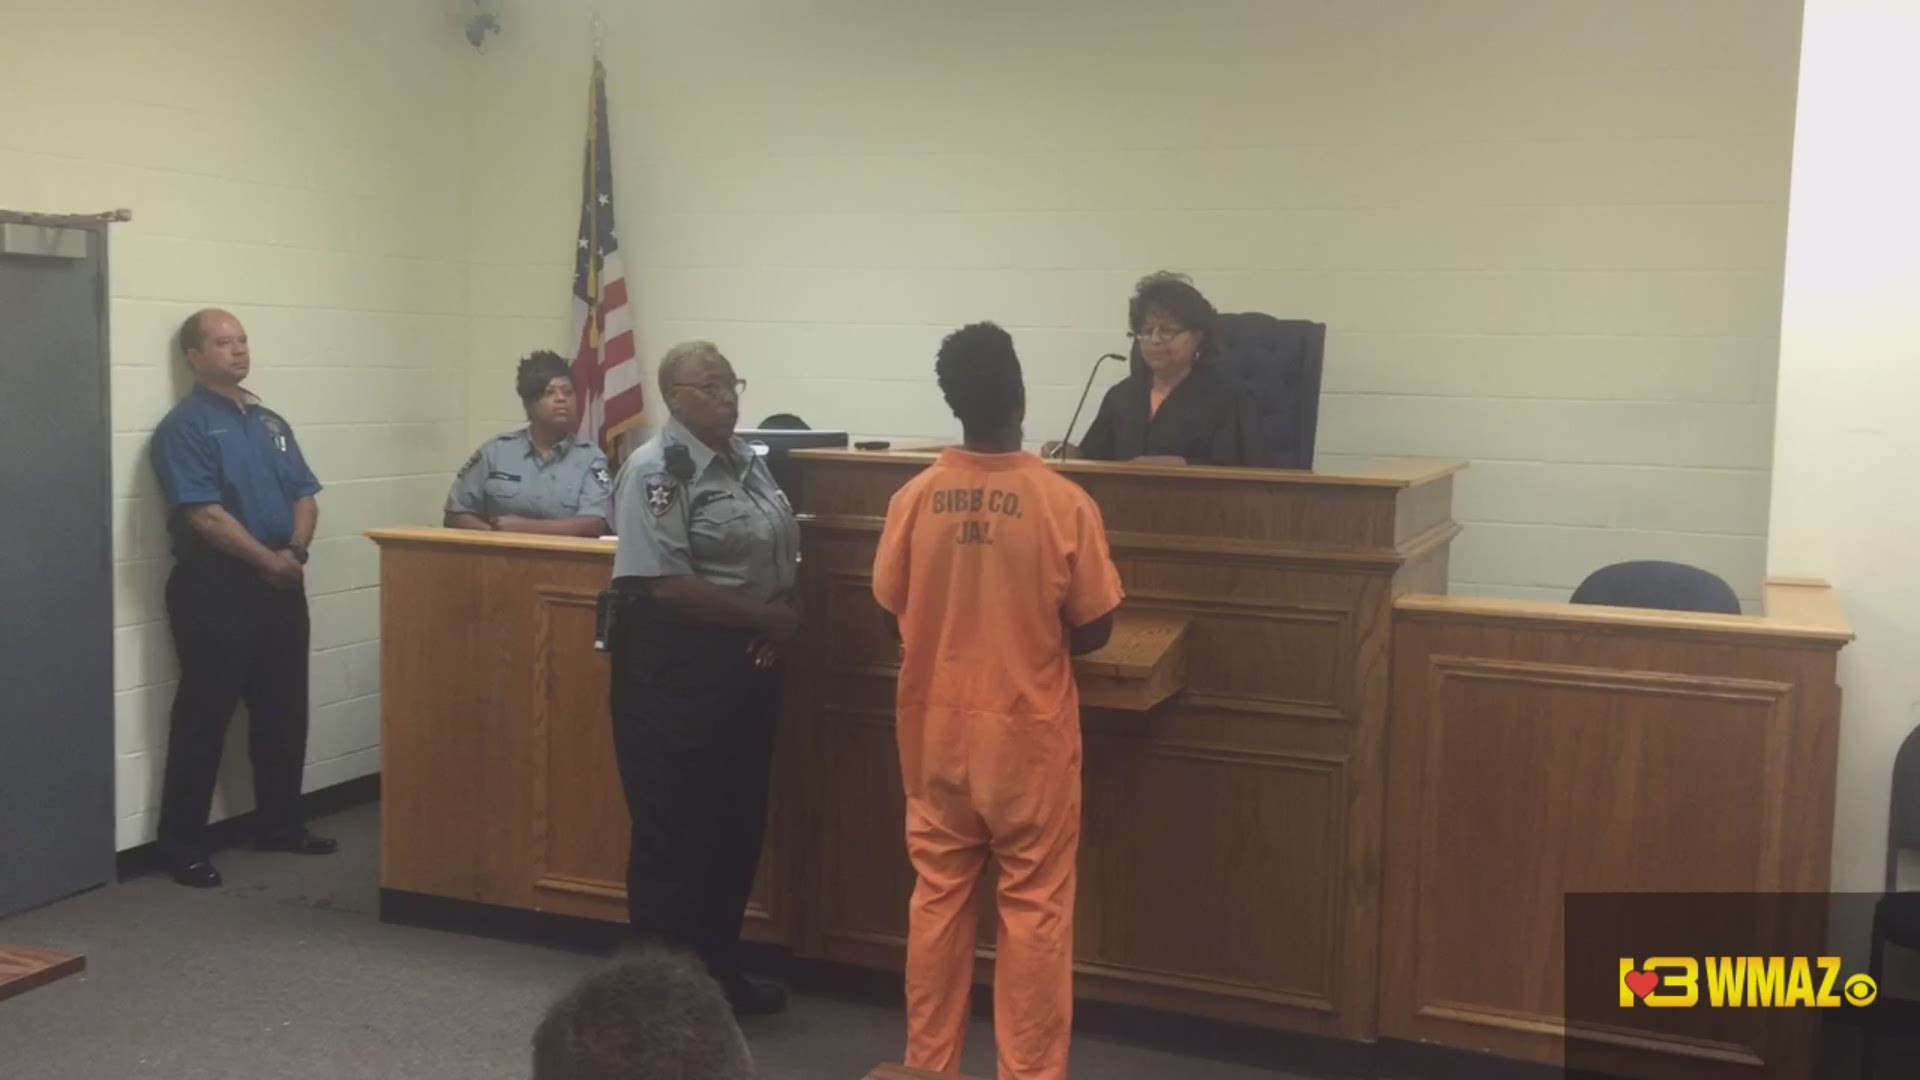 Daniel Hall appeared before a Bibb County magistrate judge Monday afternoon and was denied bond. He's accused of killing his girlfriend Kendra Roberts.